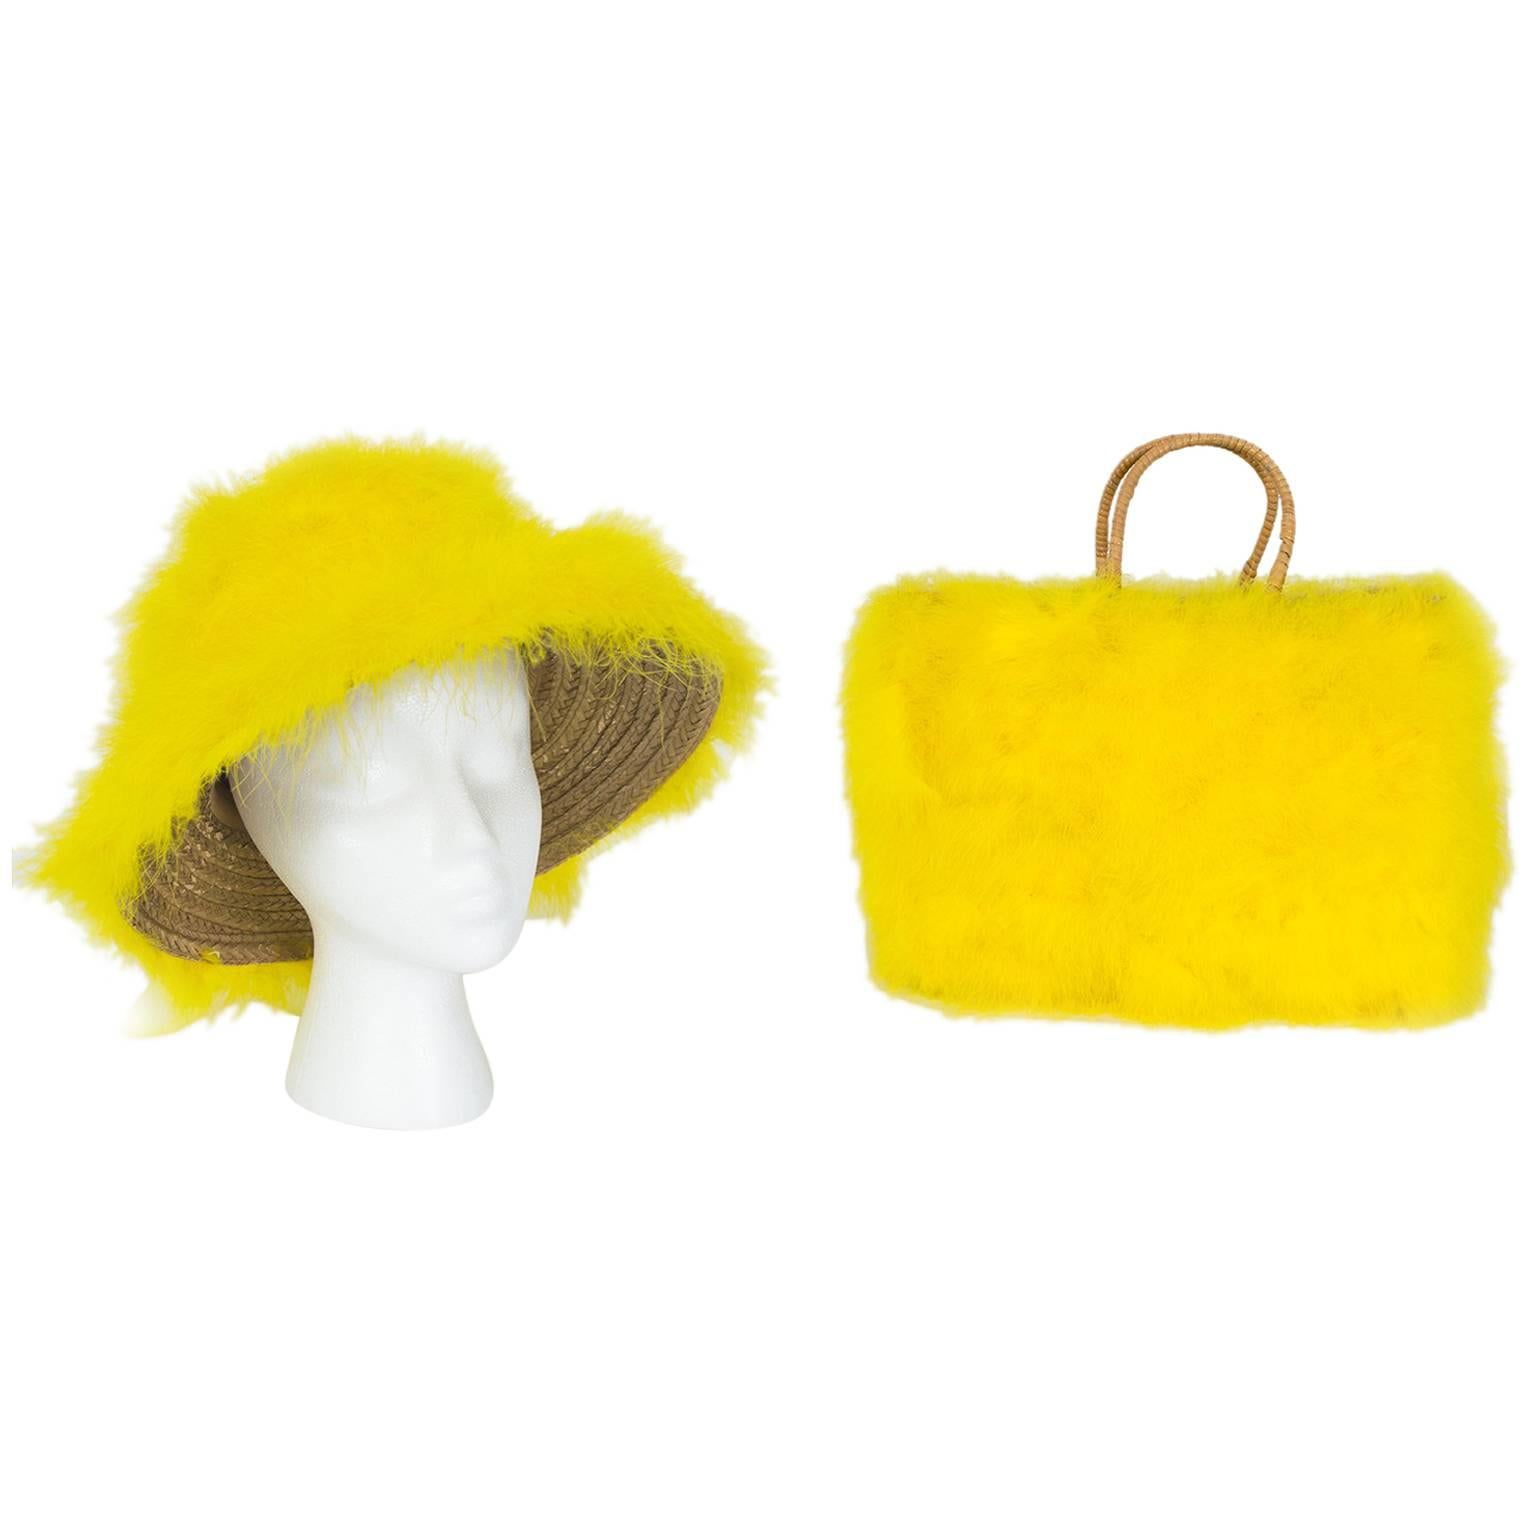 Marabou Feather Bucket Hat and Tote Bag Set, 1960s